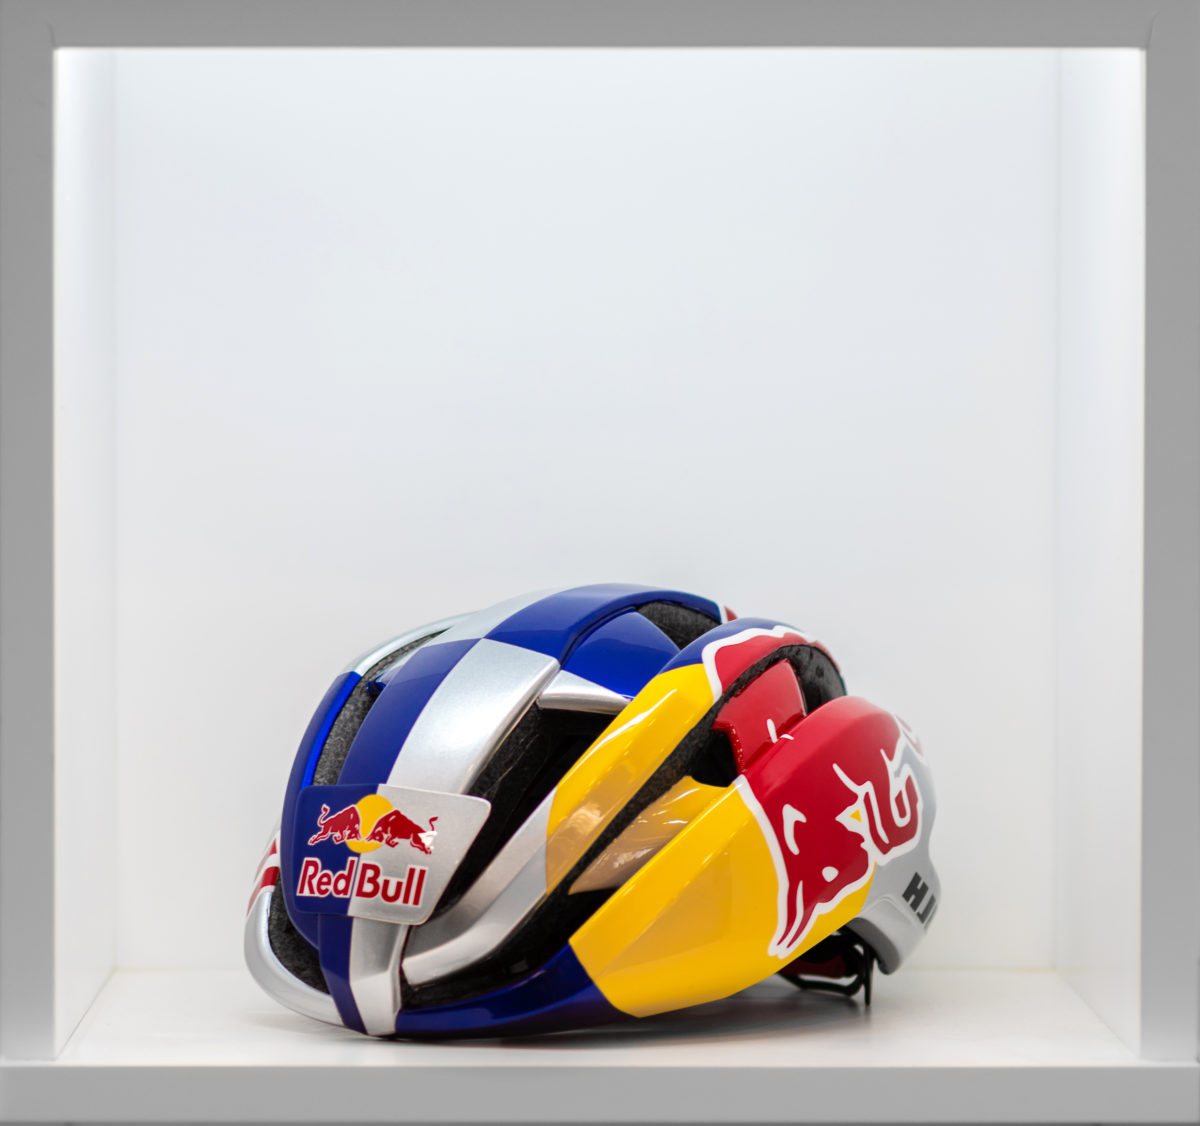 Ibex Red Bull edition for Patrick Seabase